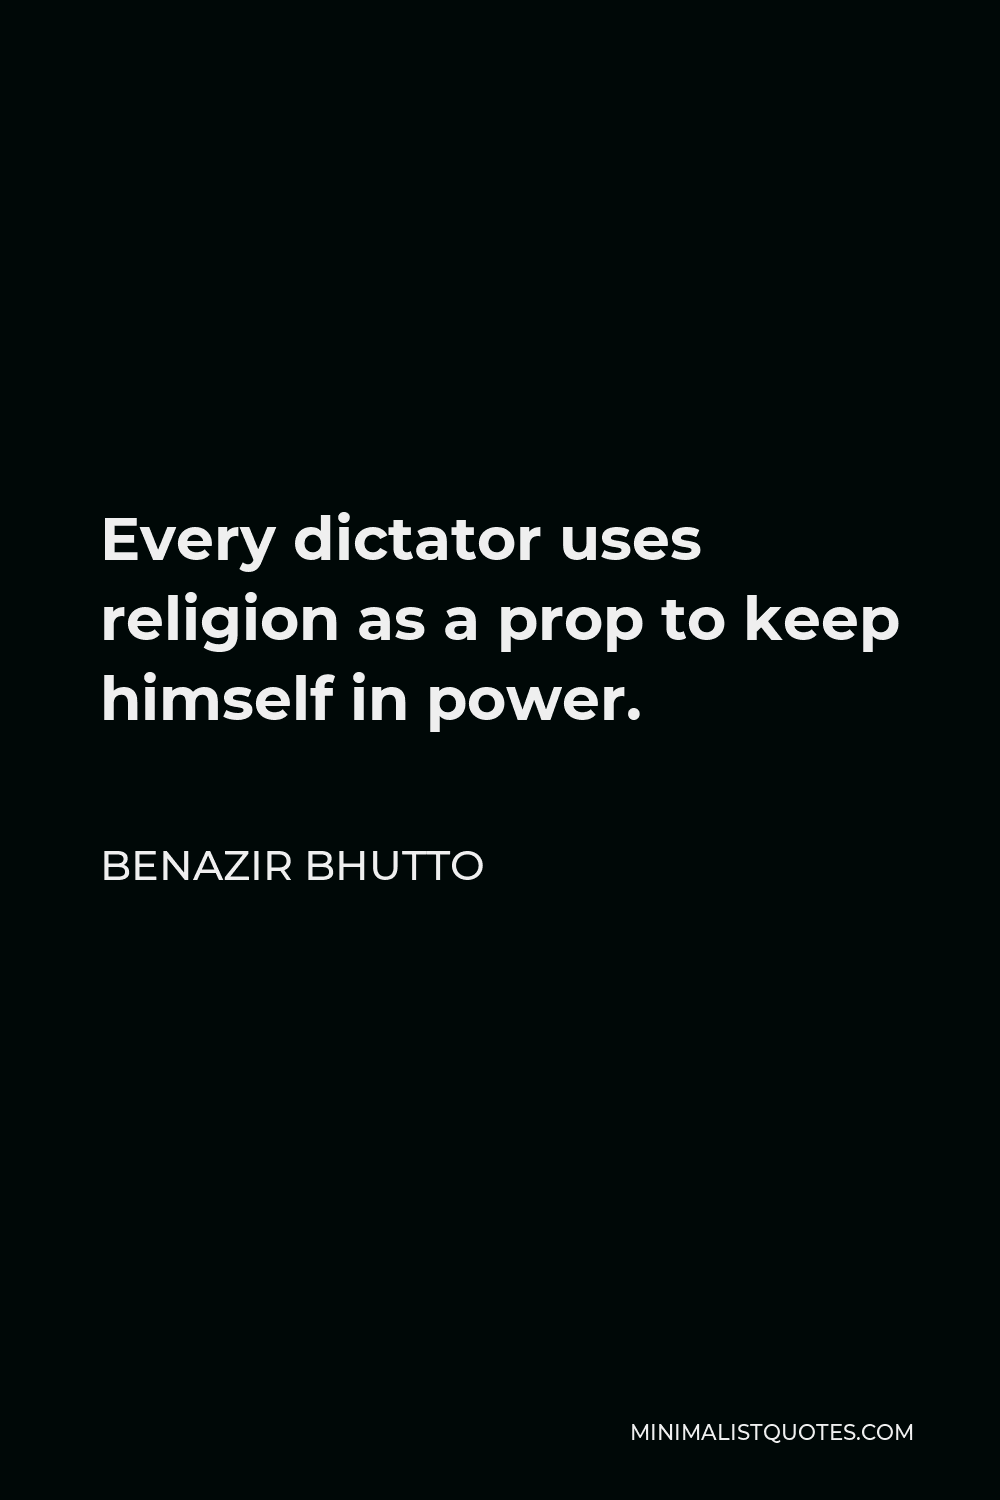 Benazir Bhutto Quote - Every dictator uses religion as a prop to keep himself in power.